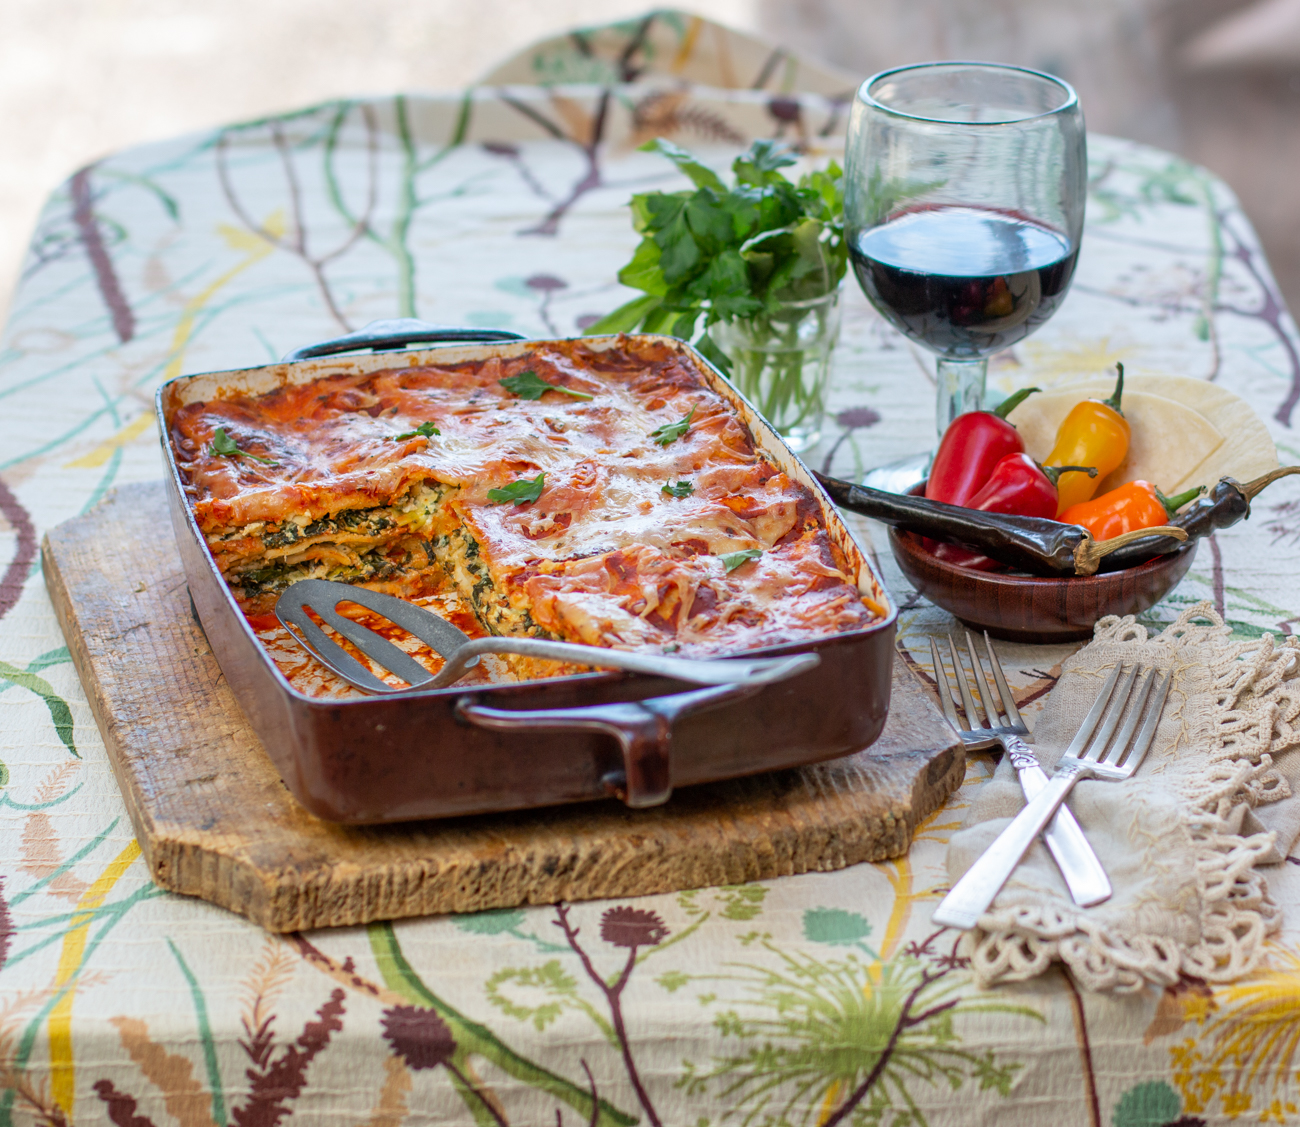 Gluten Free Corn Tortilla “Lasagne” with Green Veggies and Roasted Red Pepper Chile Sauce